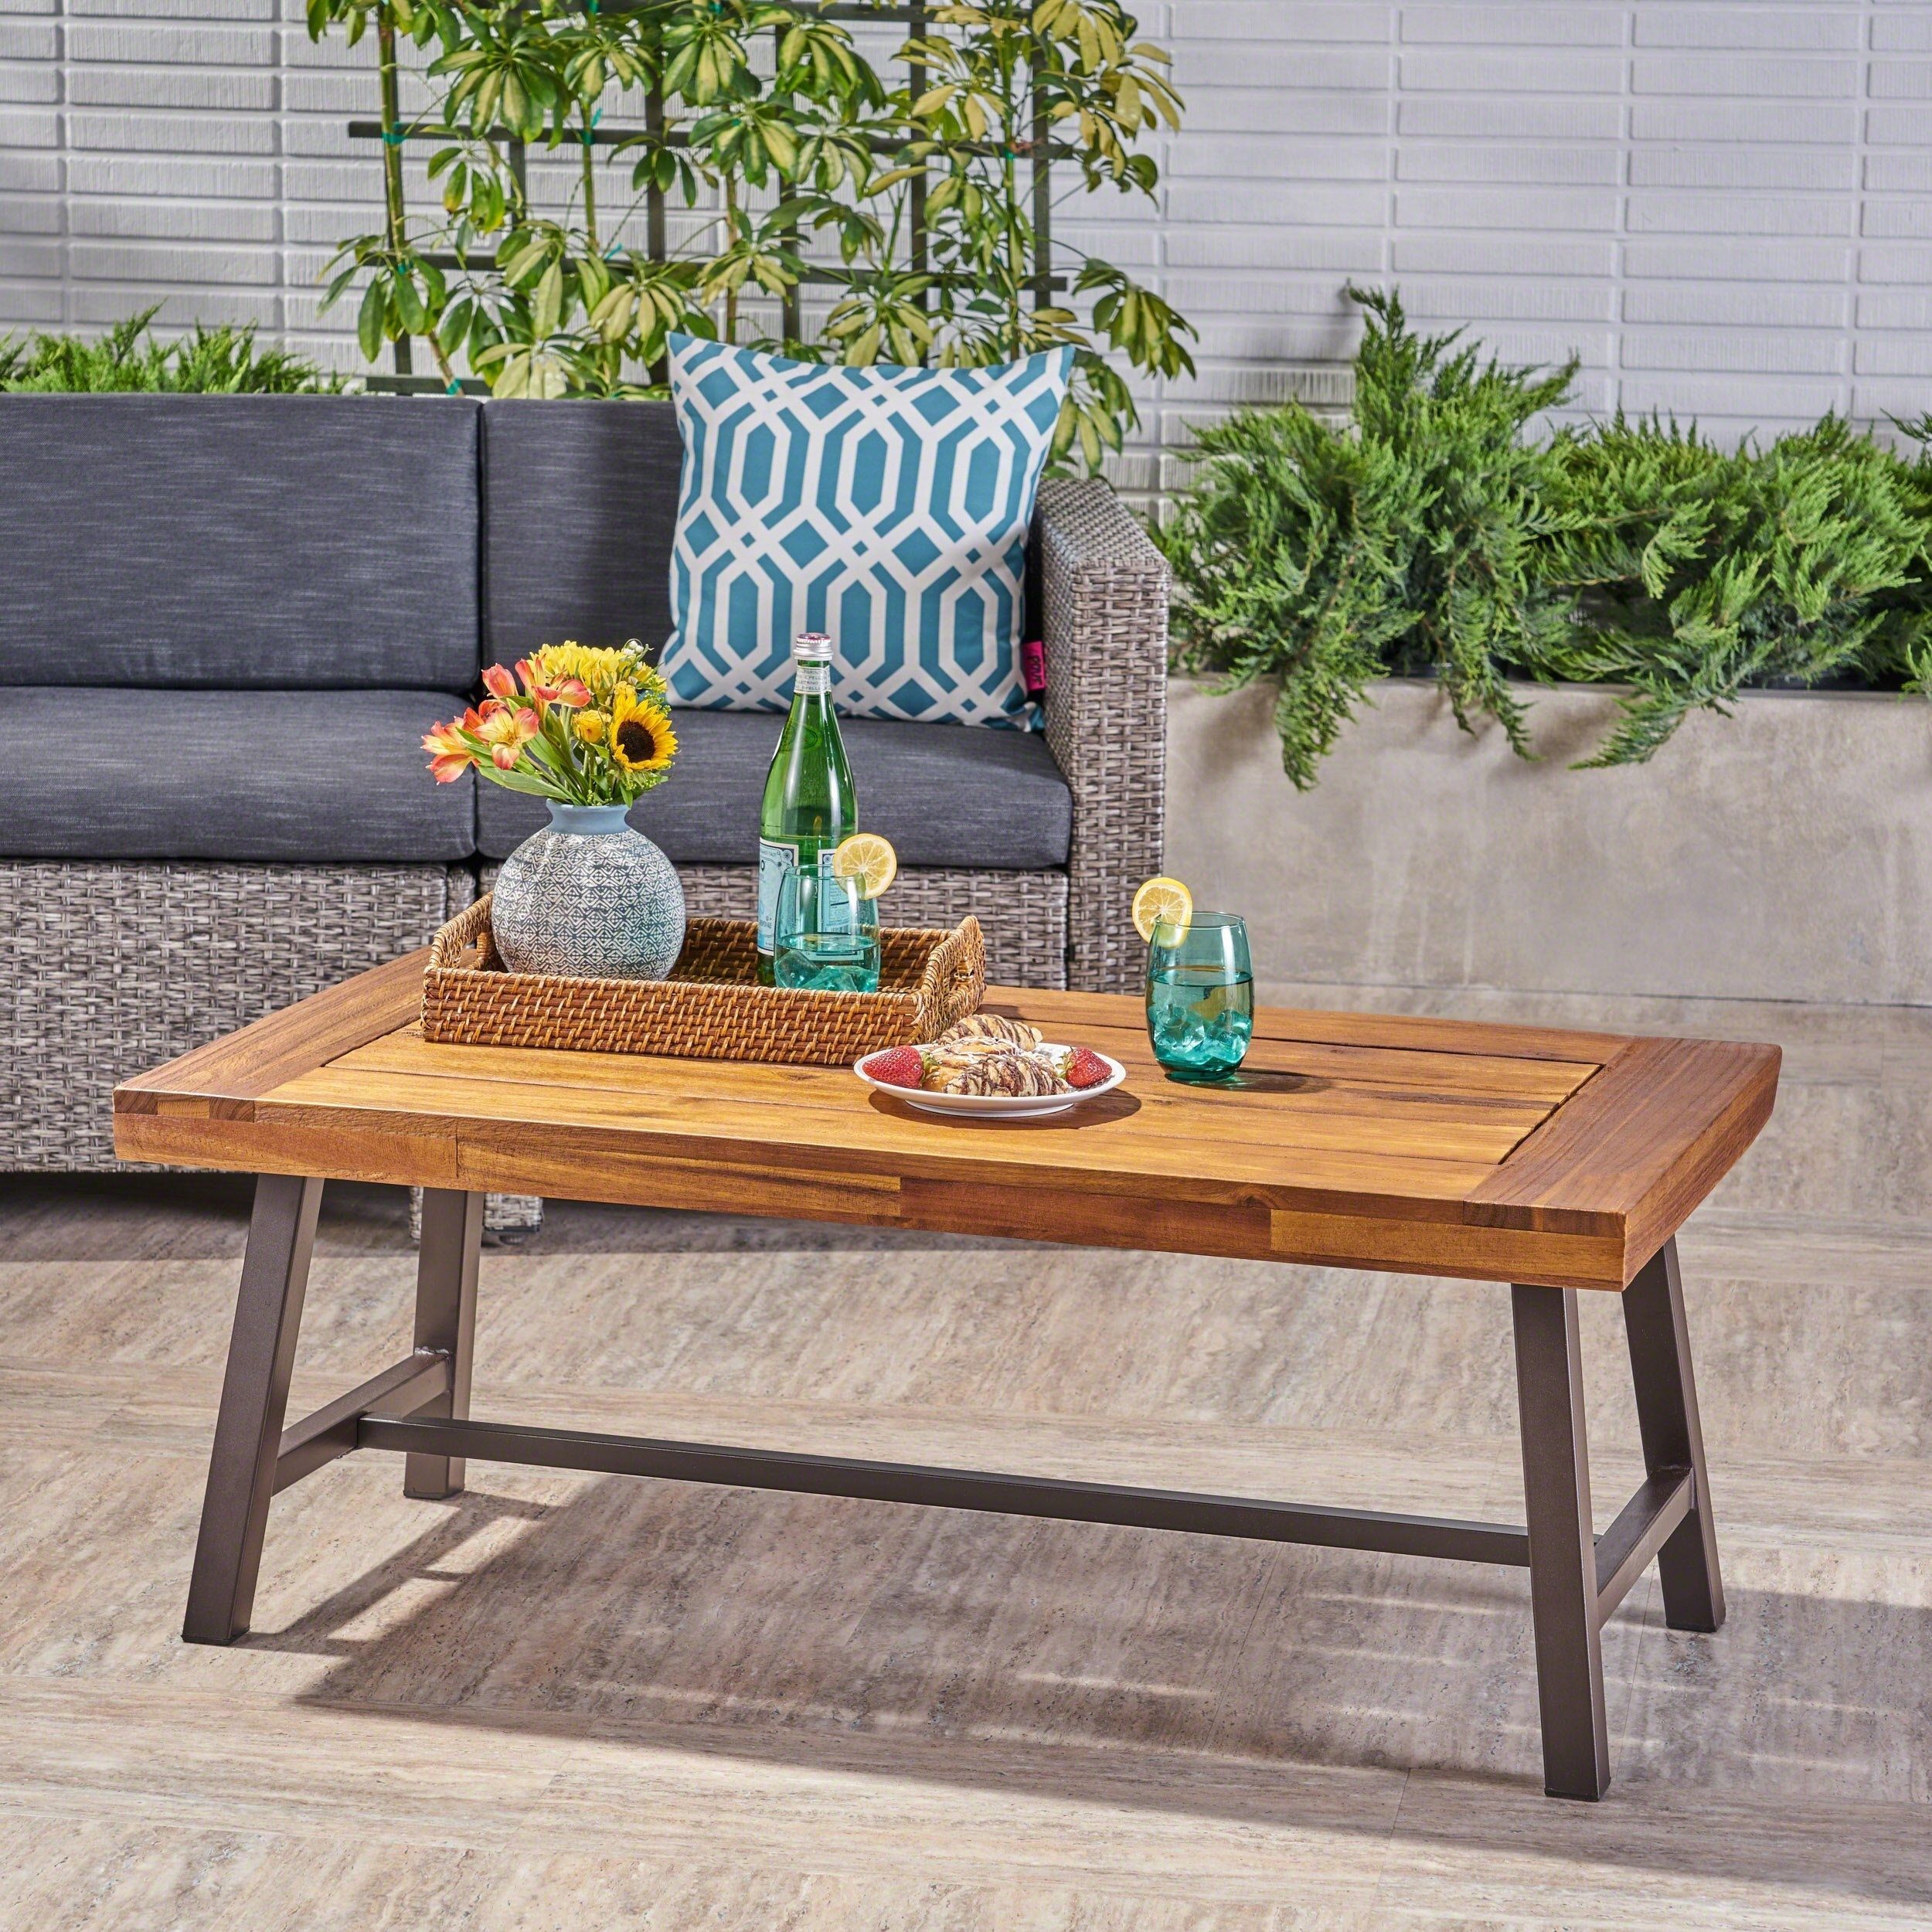 The Benefits Of A Small Outdoor Coffee Table – Coffee Table Decor For Outdoor Half Round Coffee Tables (View 16 of 20)